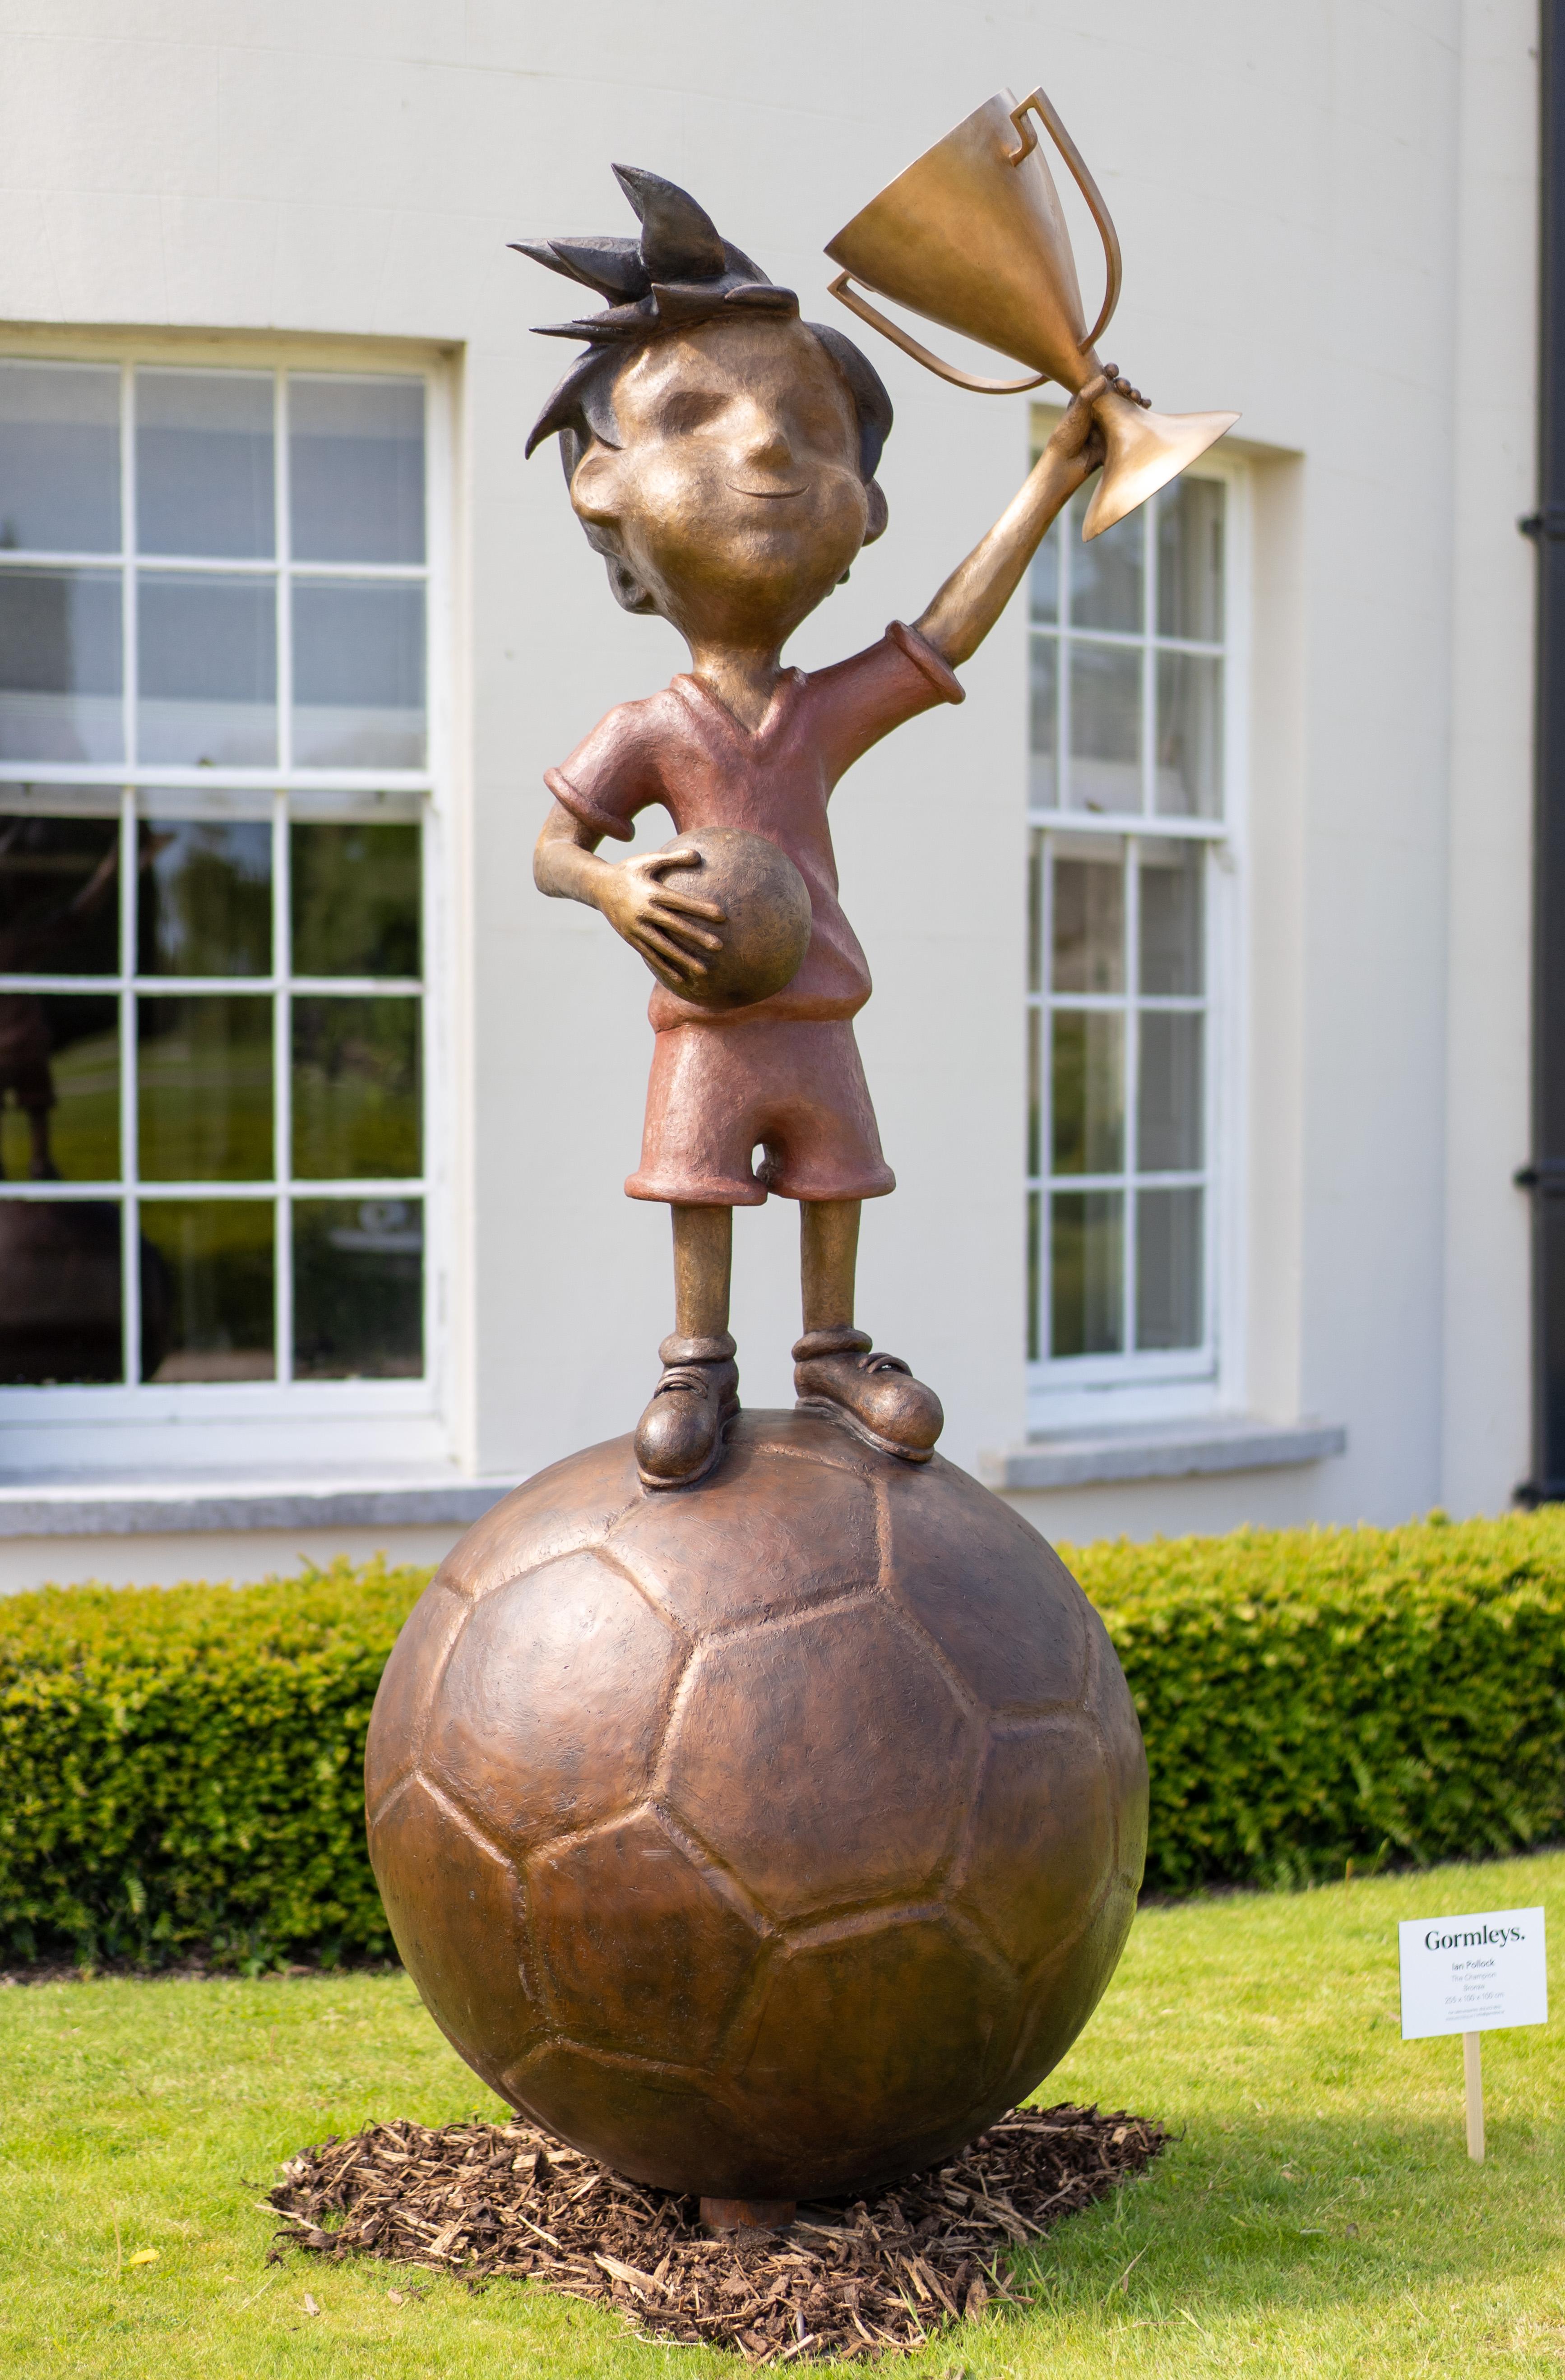 The Champion by Ian Pollock is a large scale bronze sculpture from an edition of 3.

